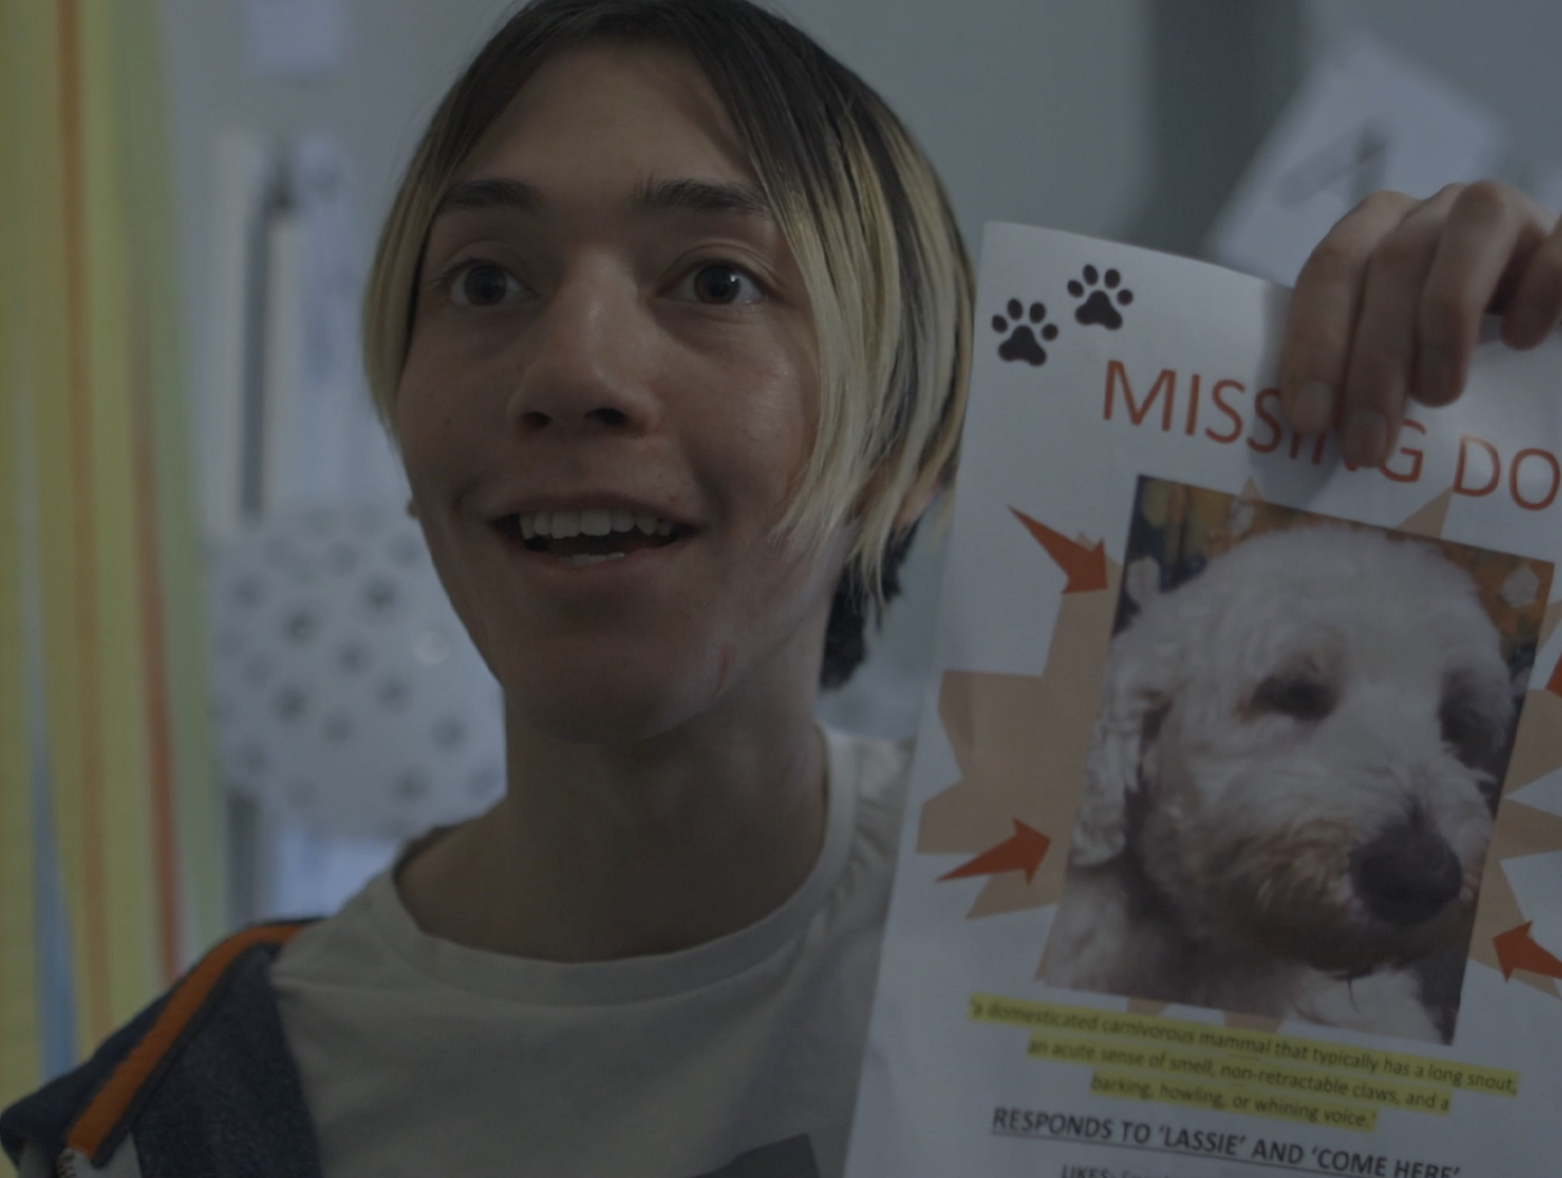 Still from a short film directed by Tom Willbourne' showing a character holding a missing dog poster